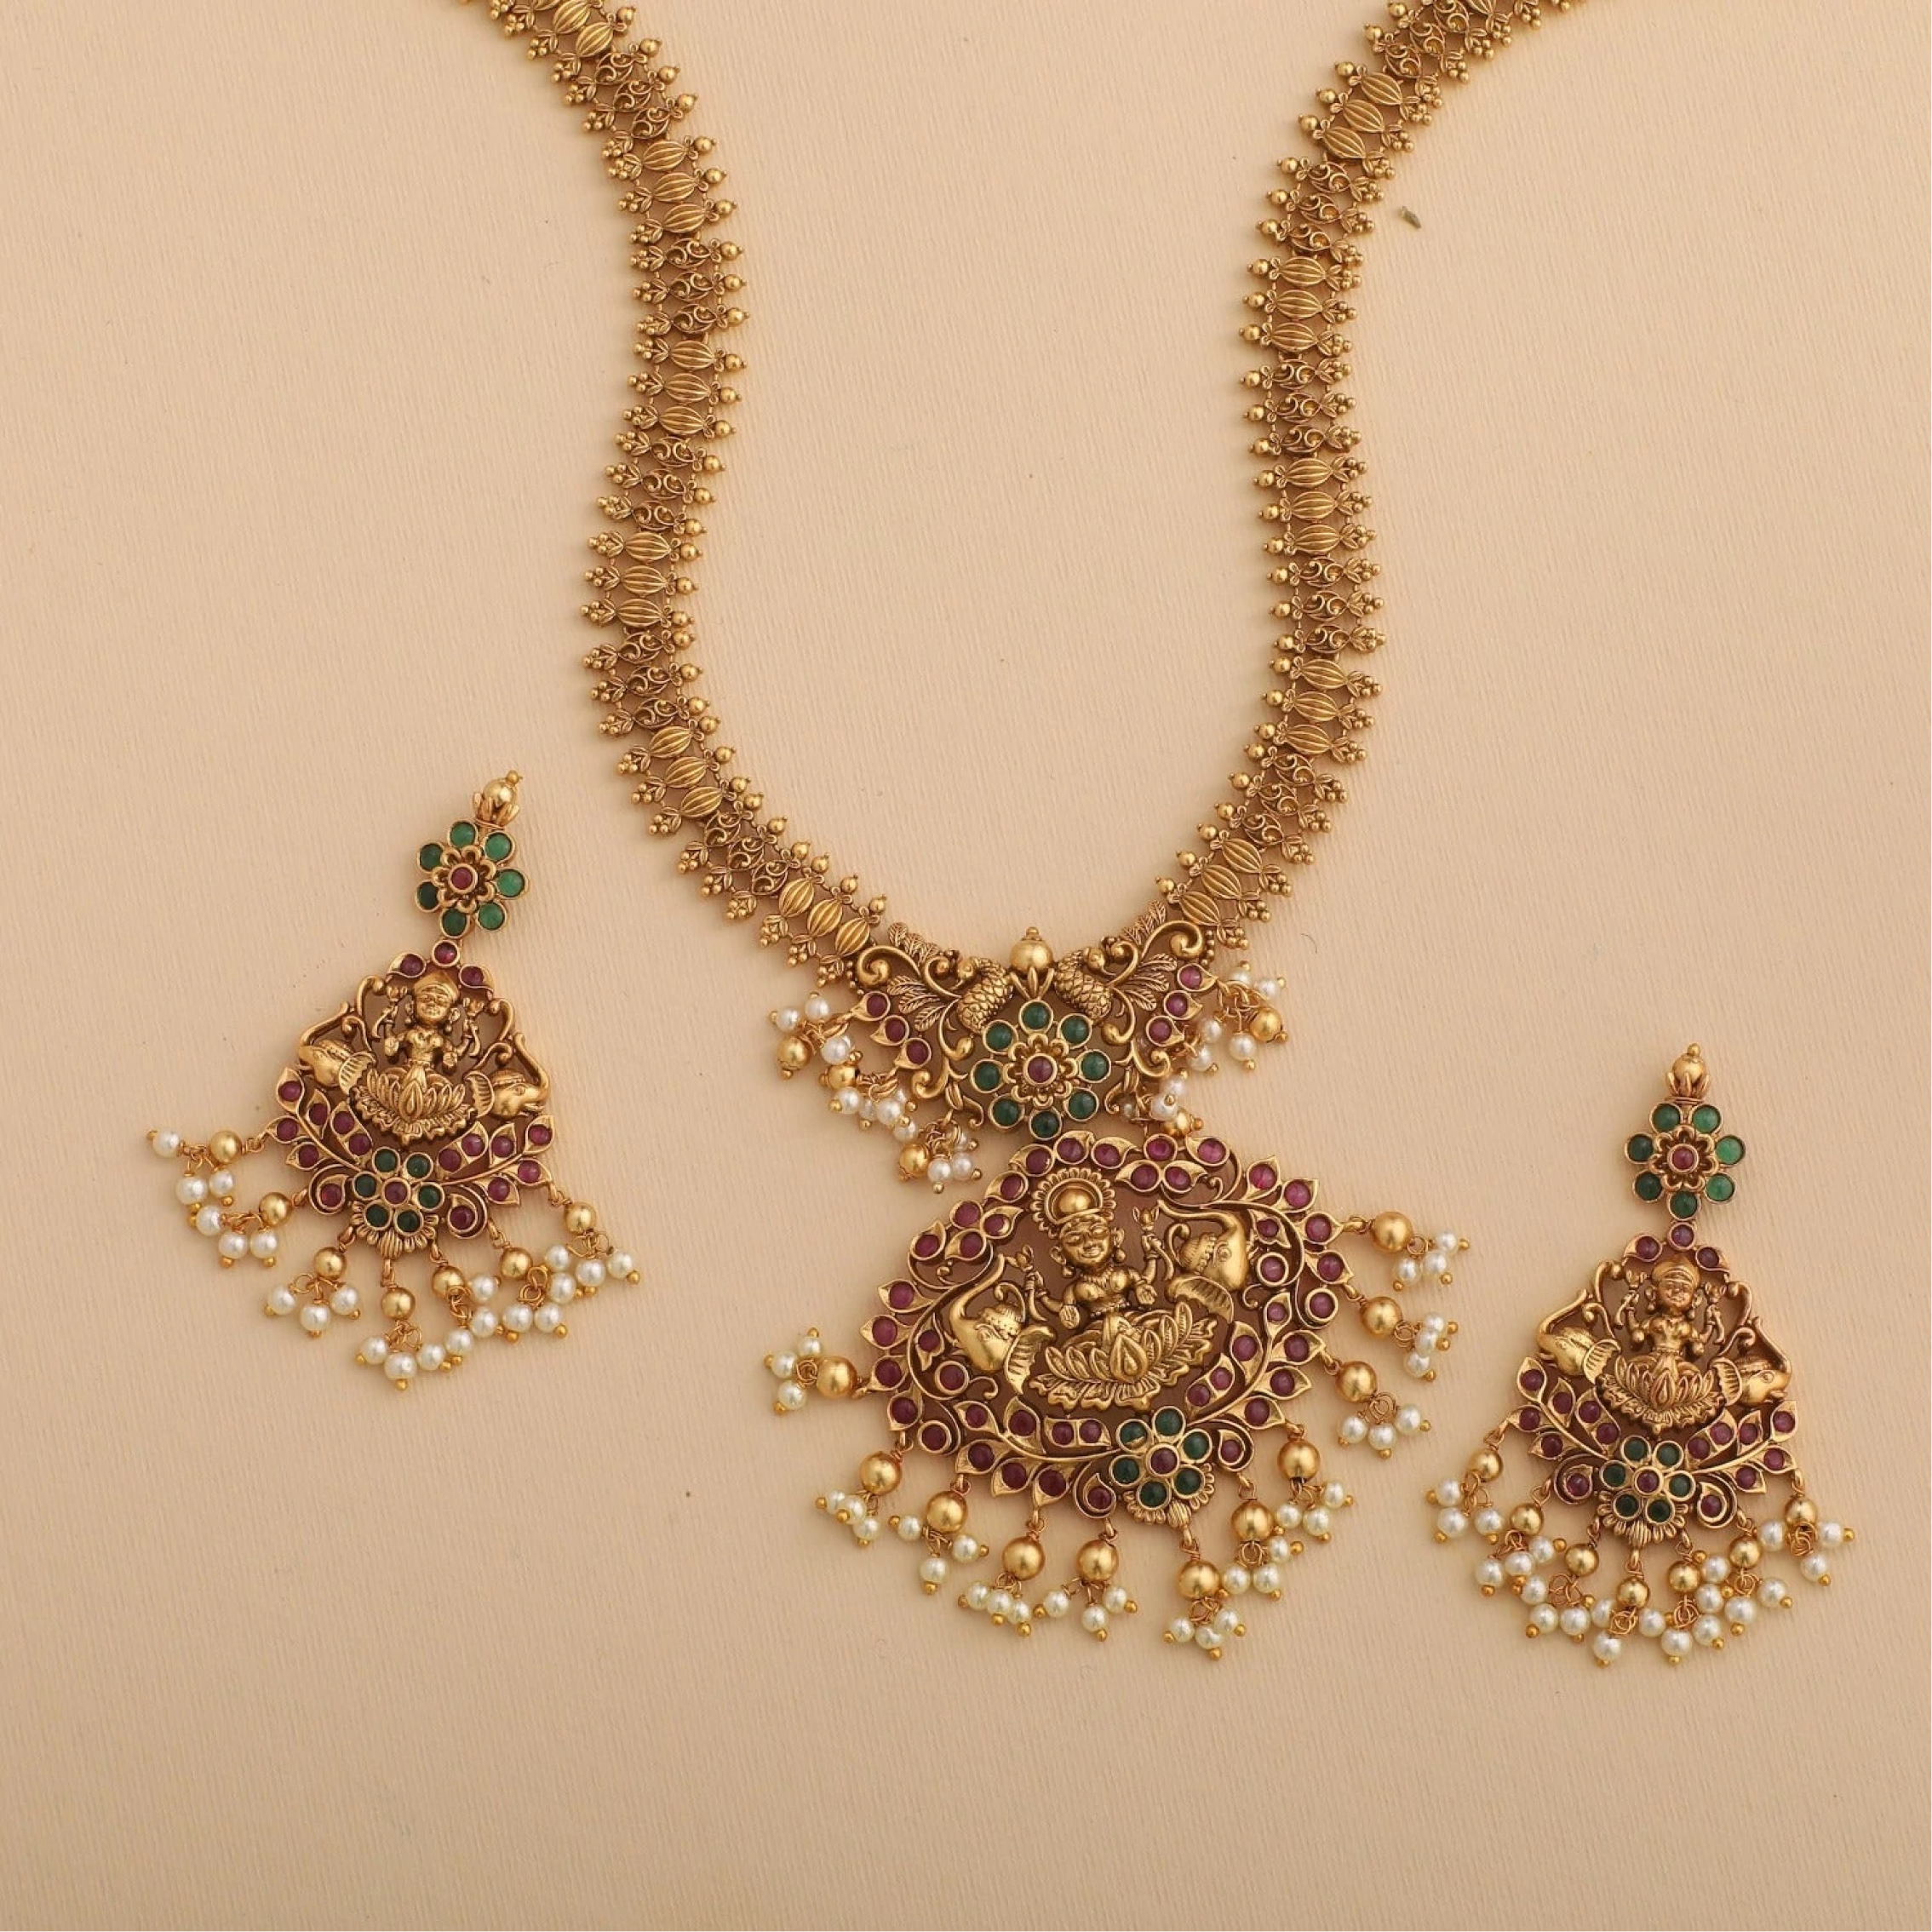 a matching long gold necklace and stud earrings with pearls